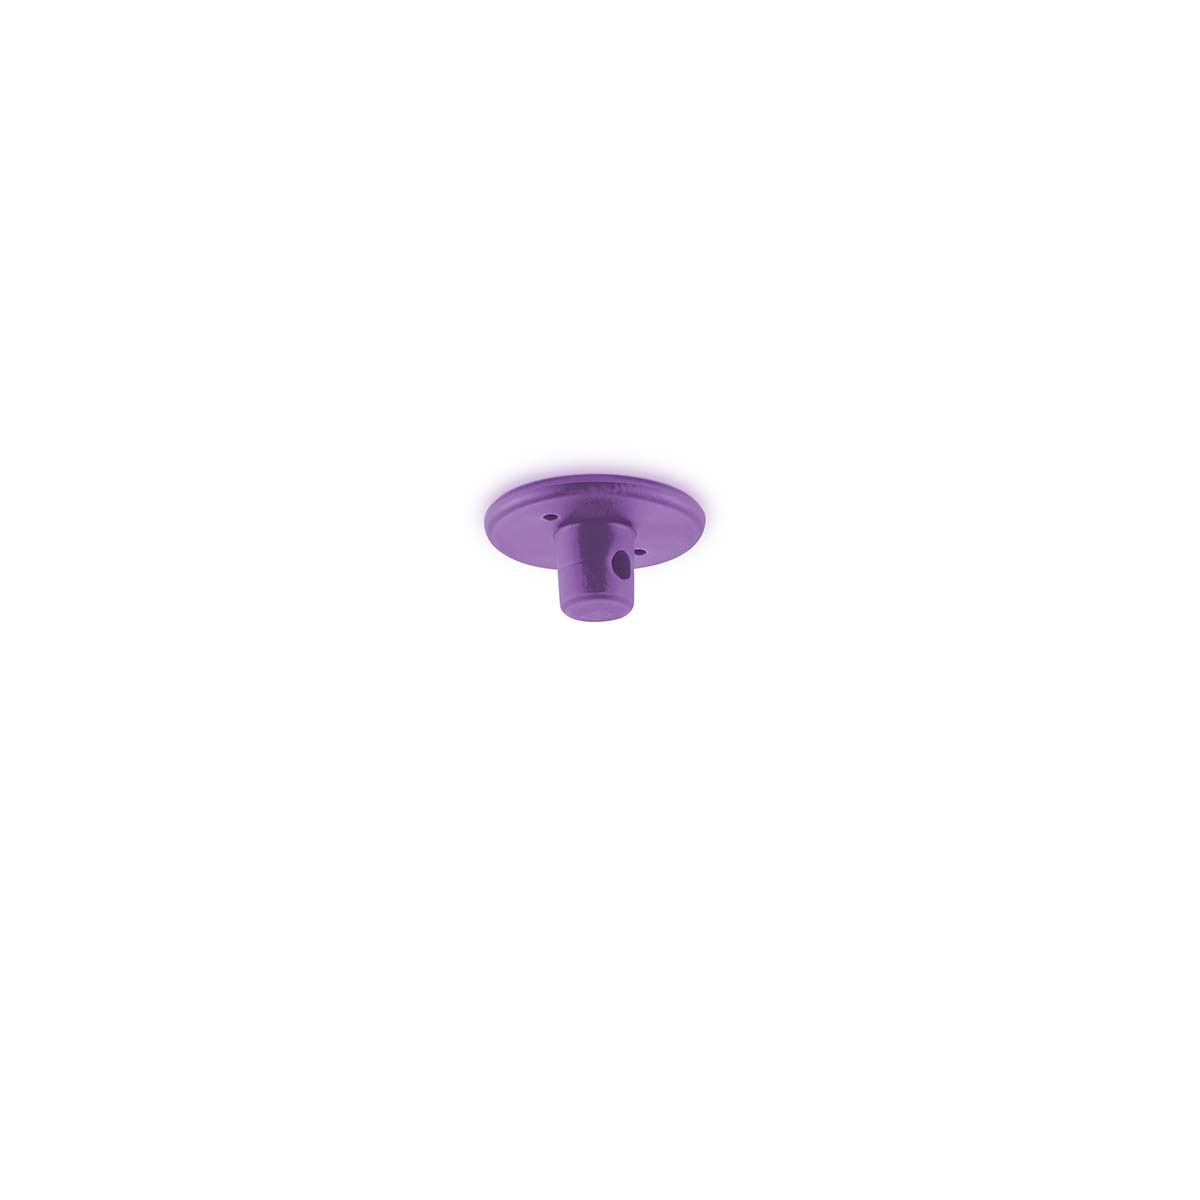 Tangla lighting - TLHG003PP - Silicone cable hanger - mix and match - purple